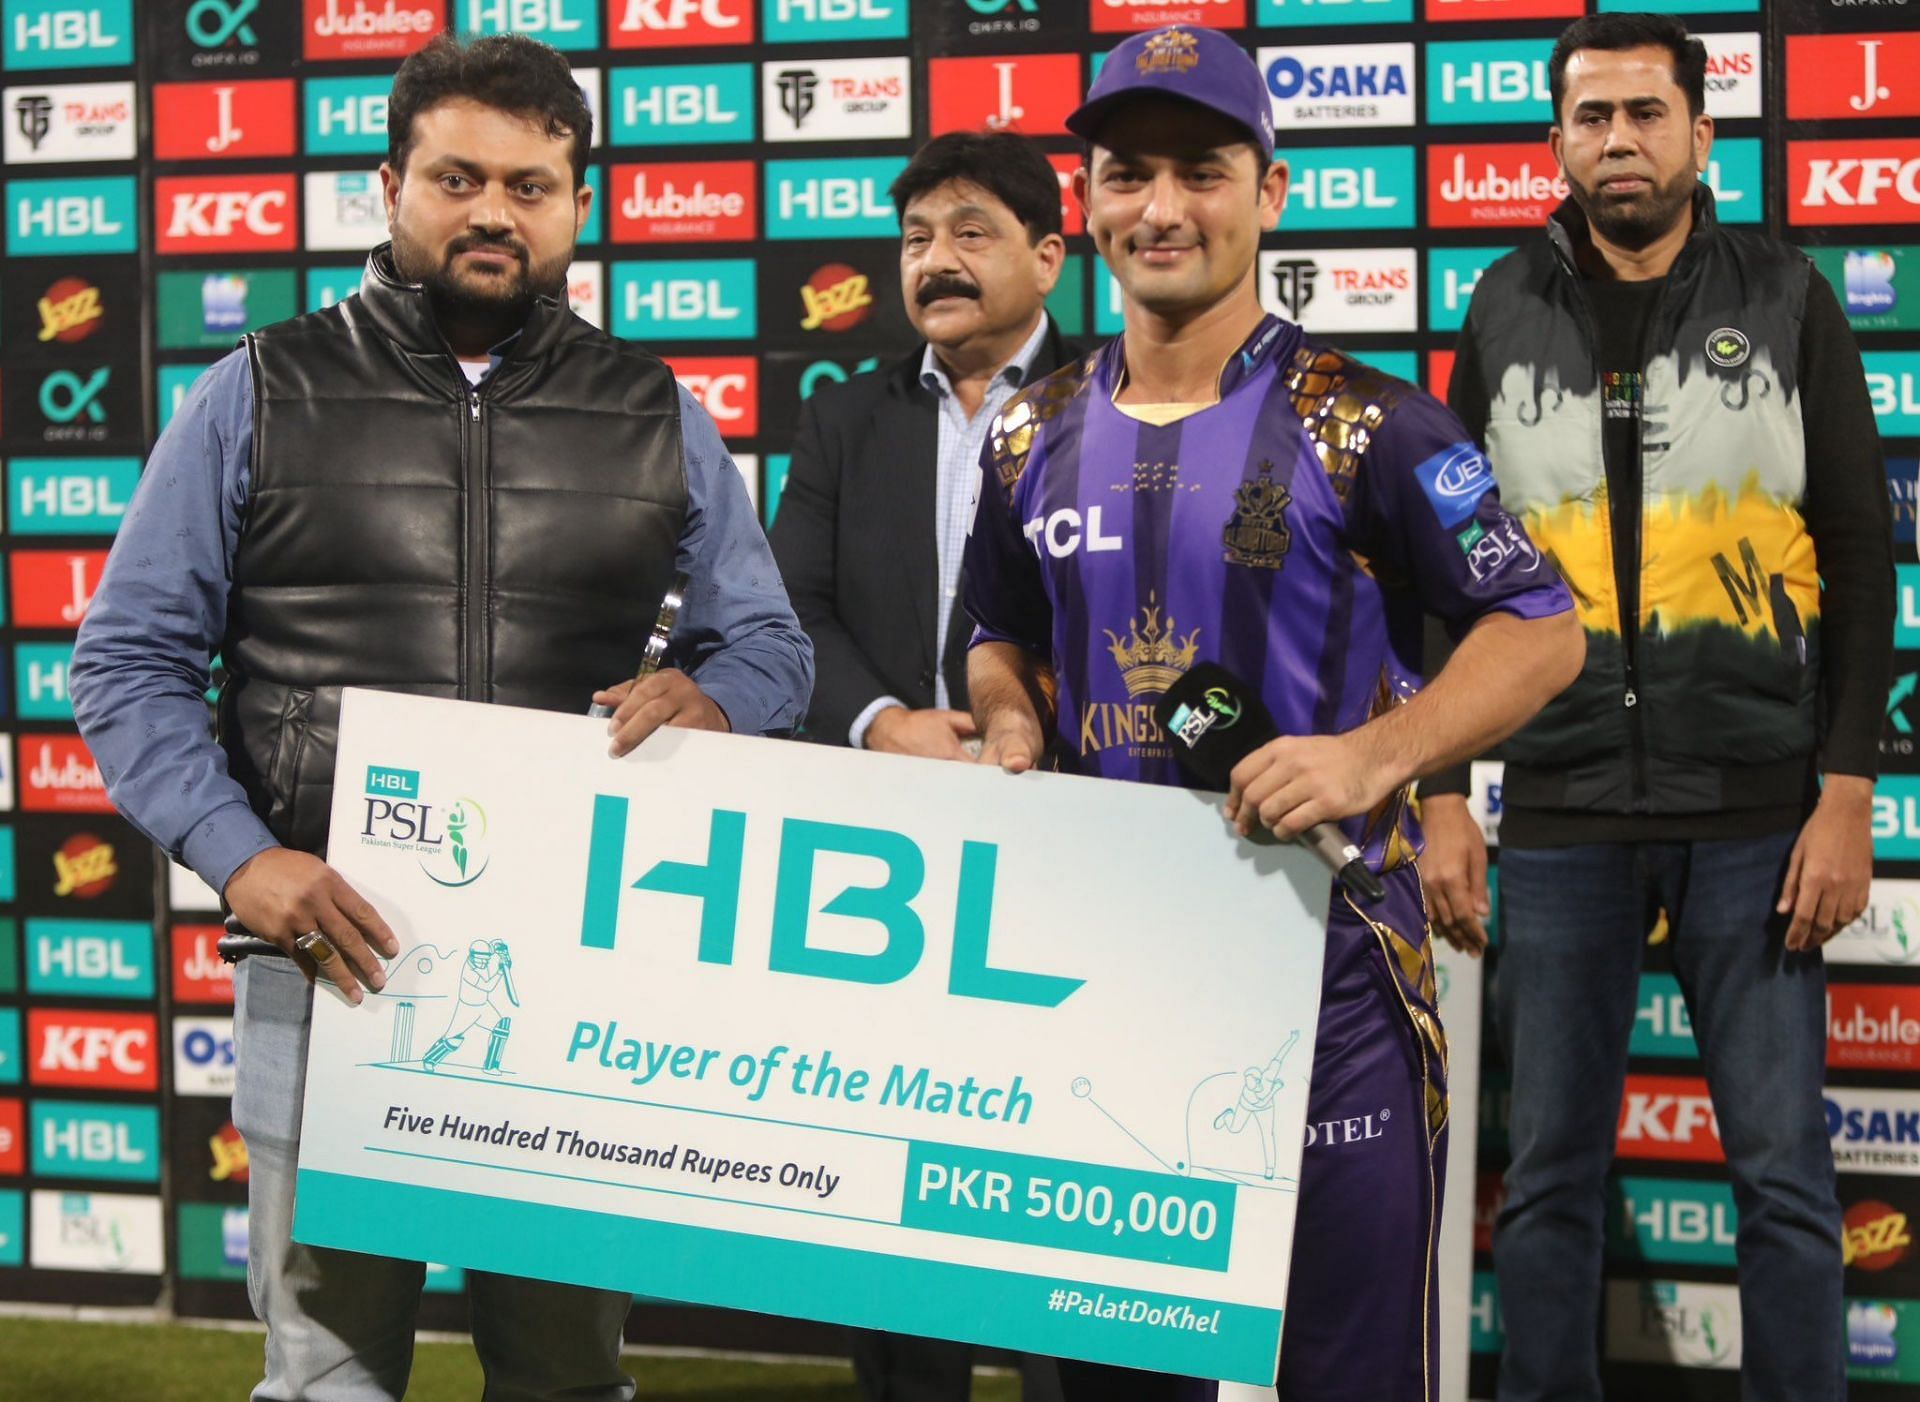 Khawaja Nafay receives the Player of The Match award. (Credits: Twitter)